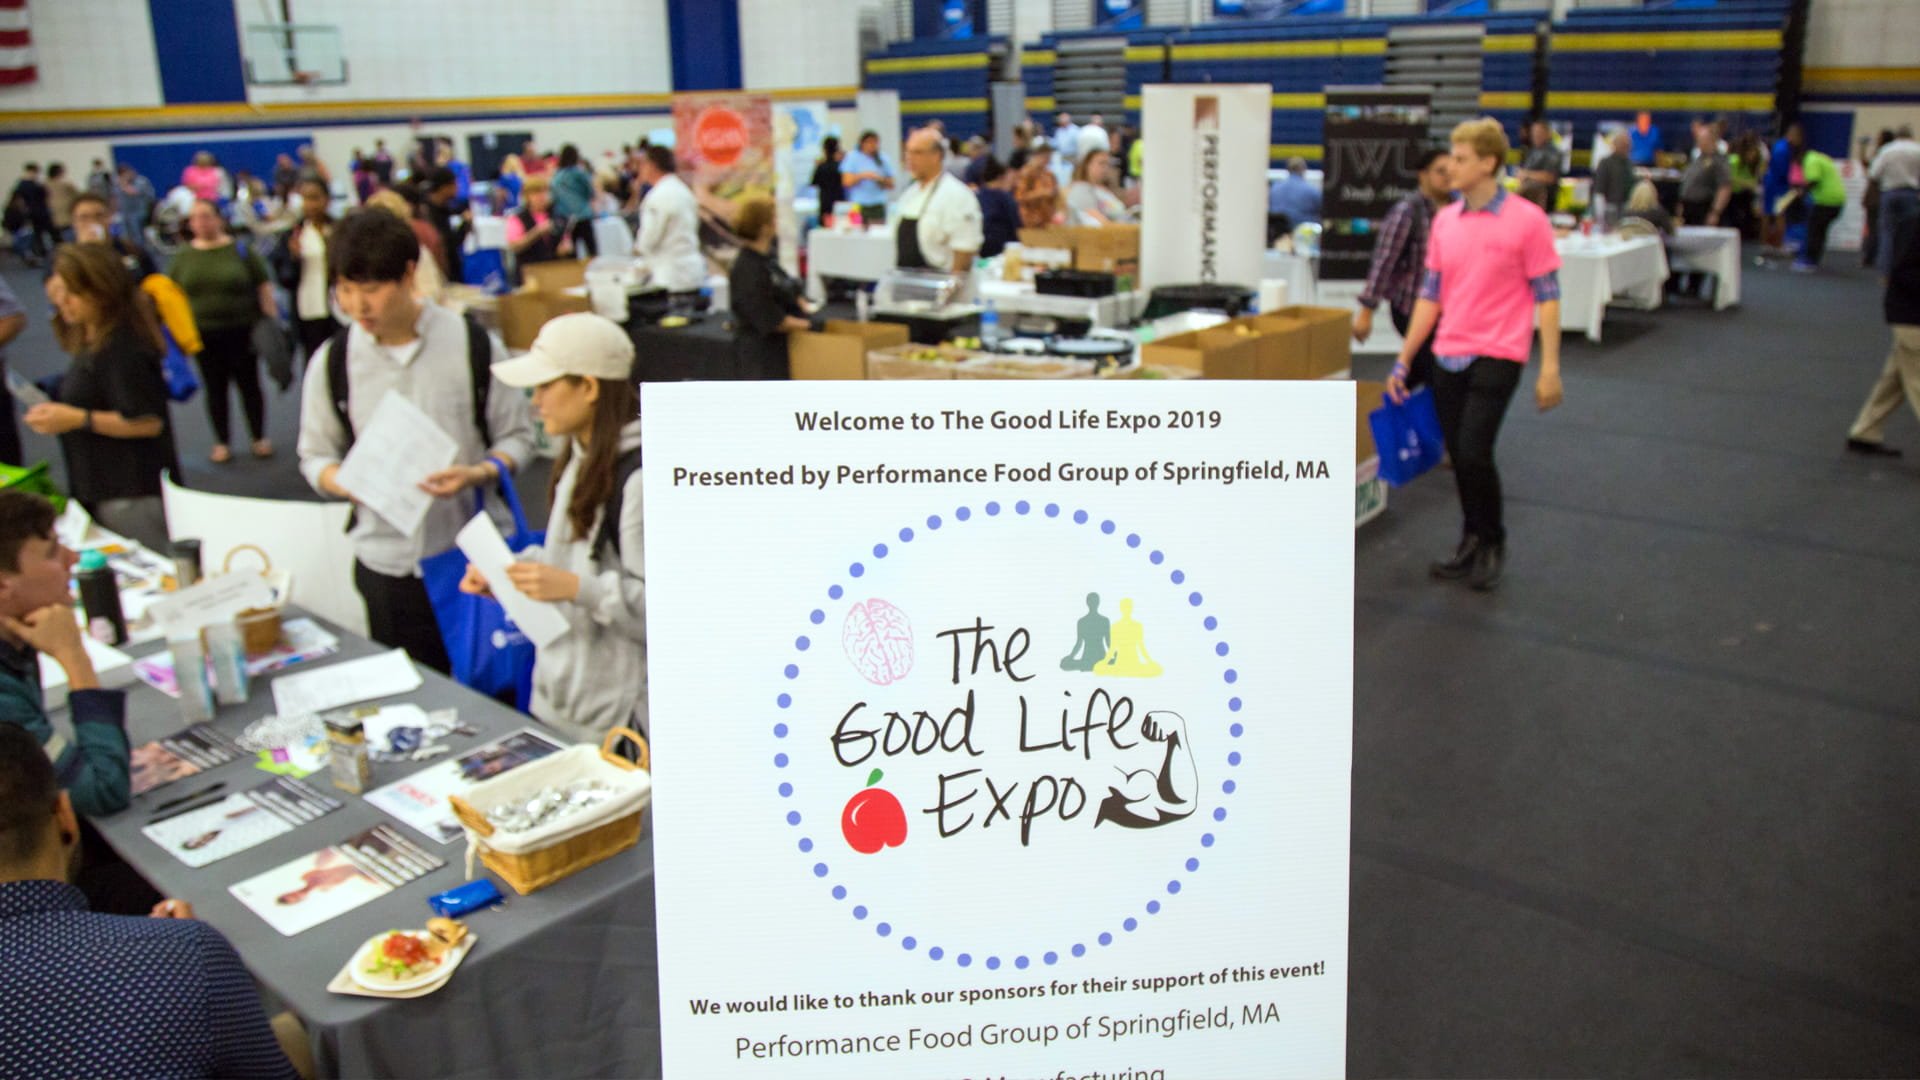 Welcome to the Good Life Expo at JWU